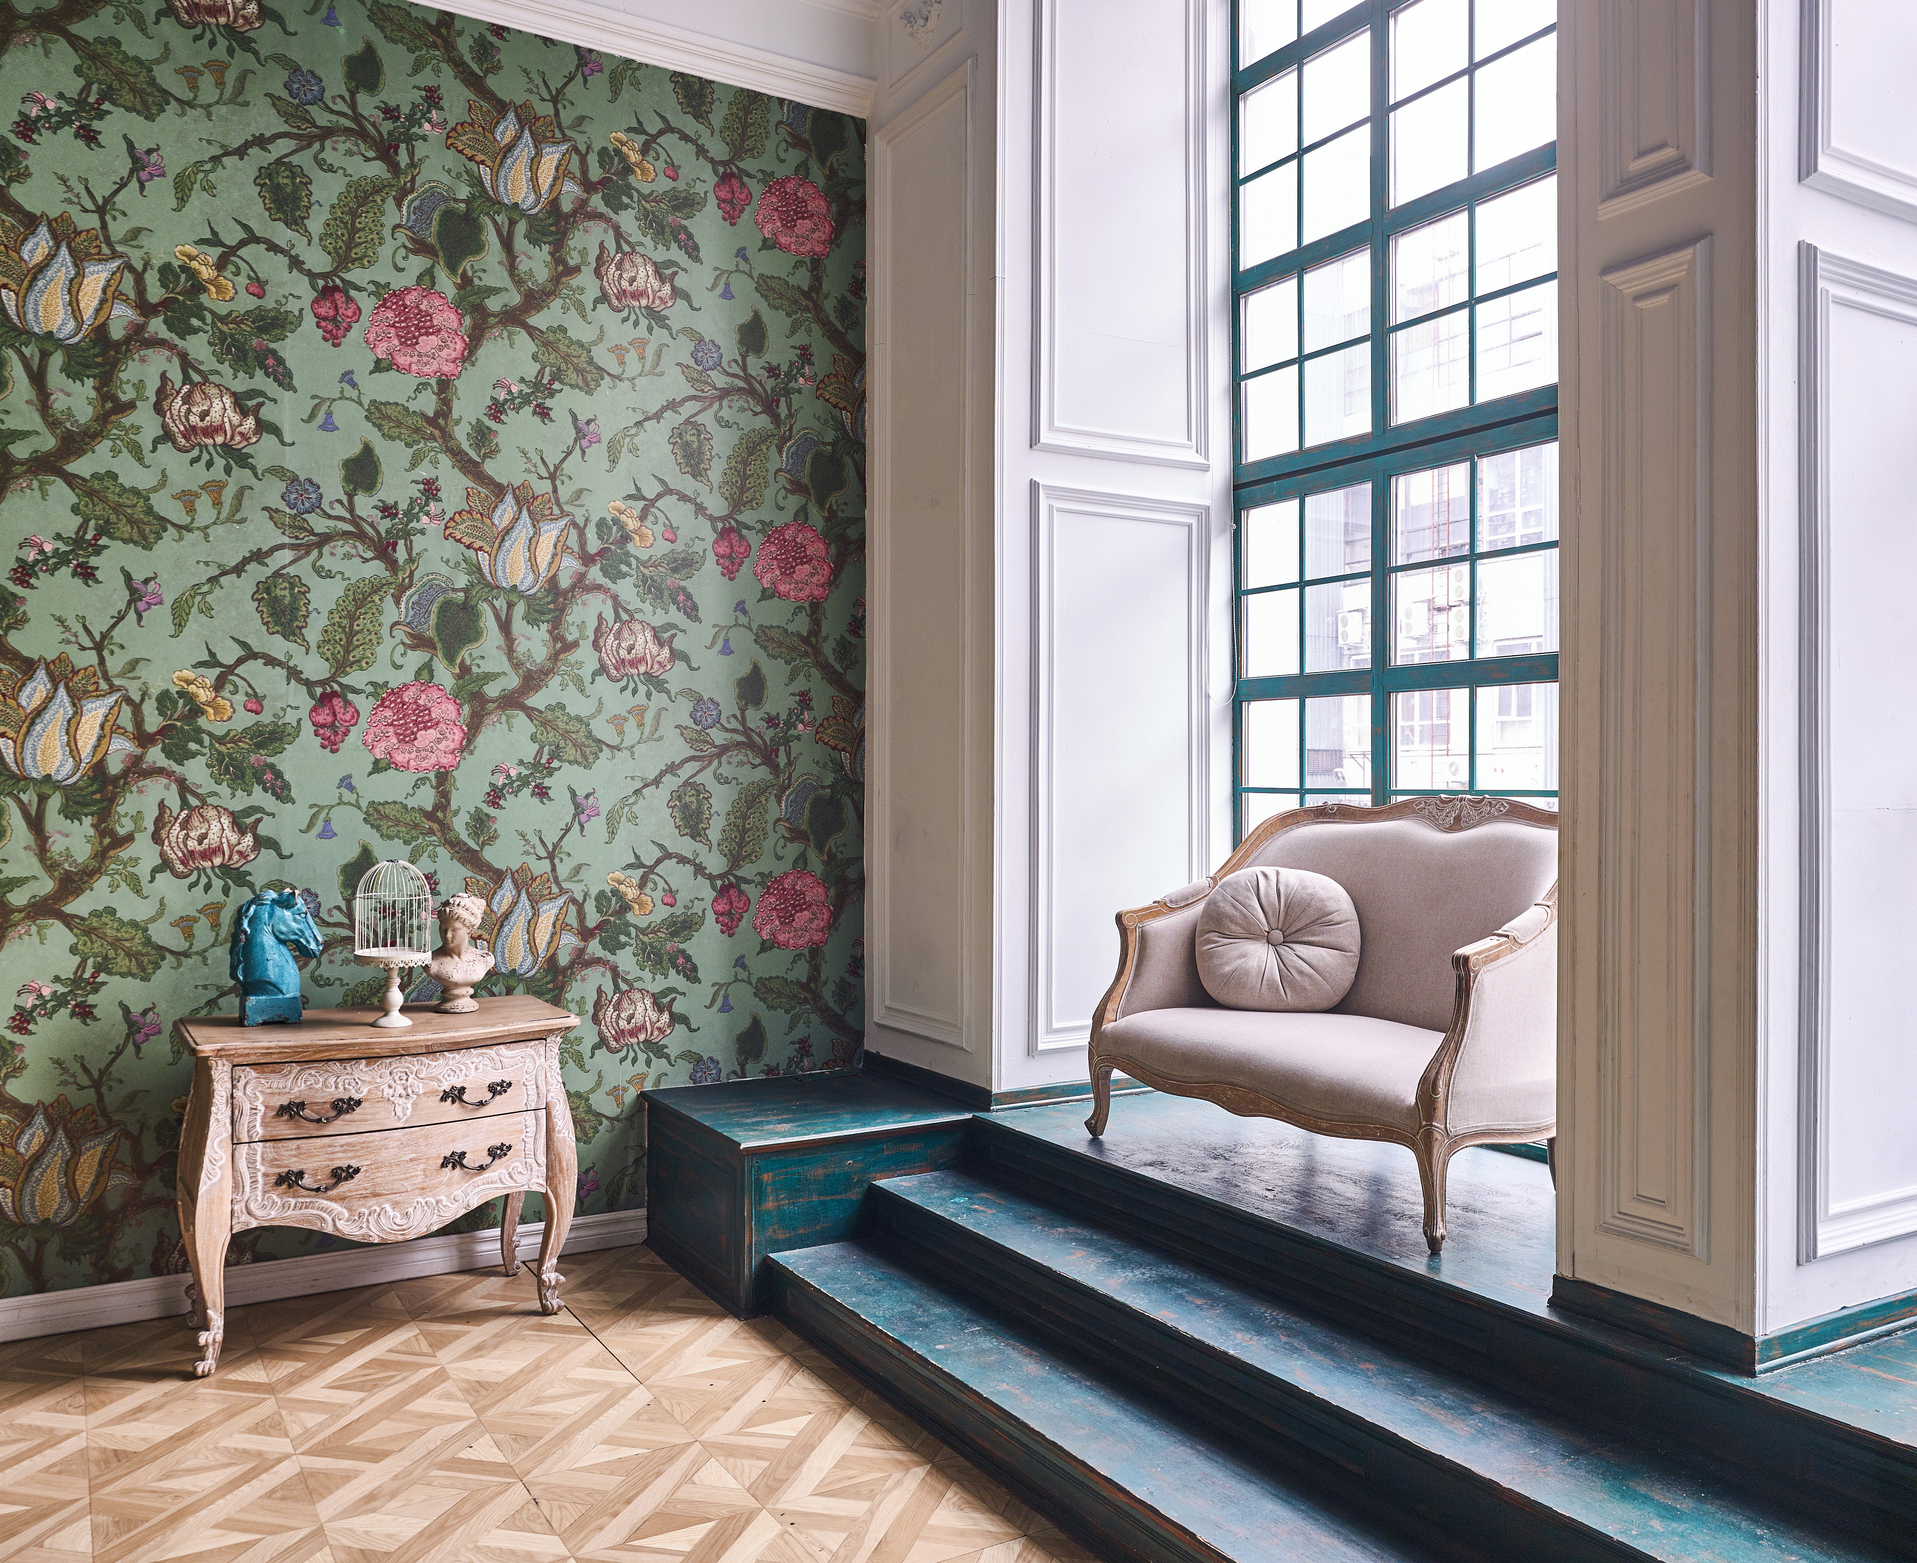 An elegant room with floral wallpaper a classic armchair and a small table beside a large window